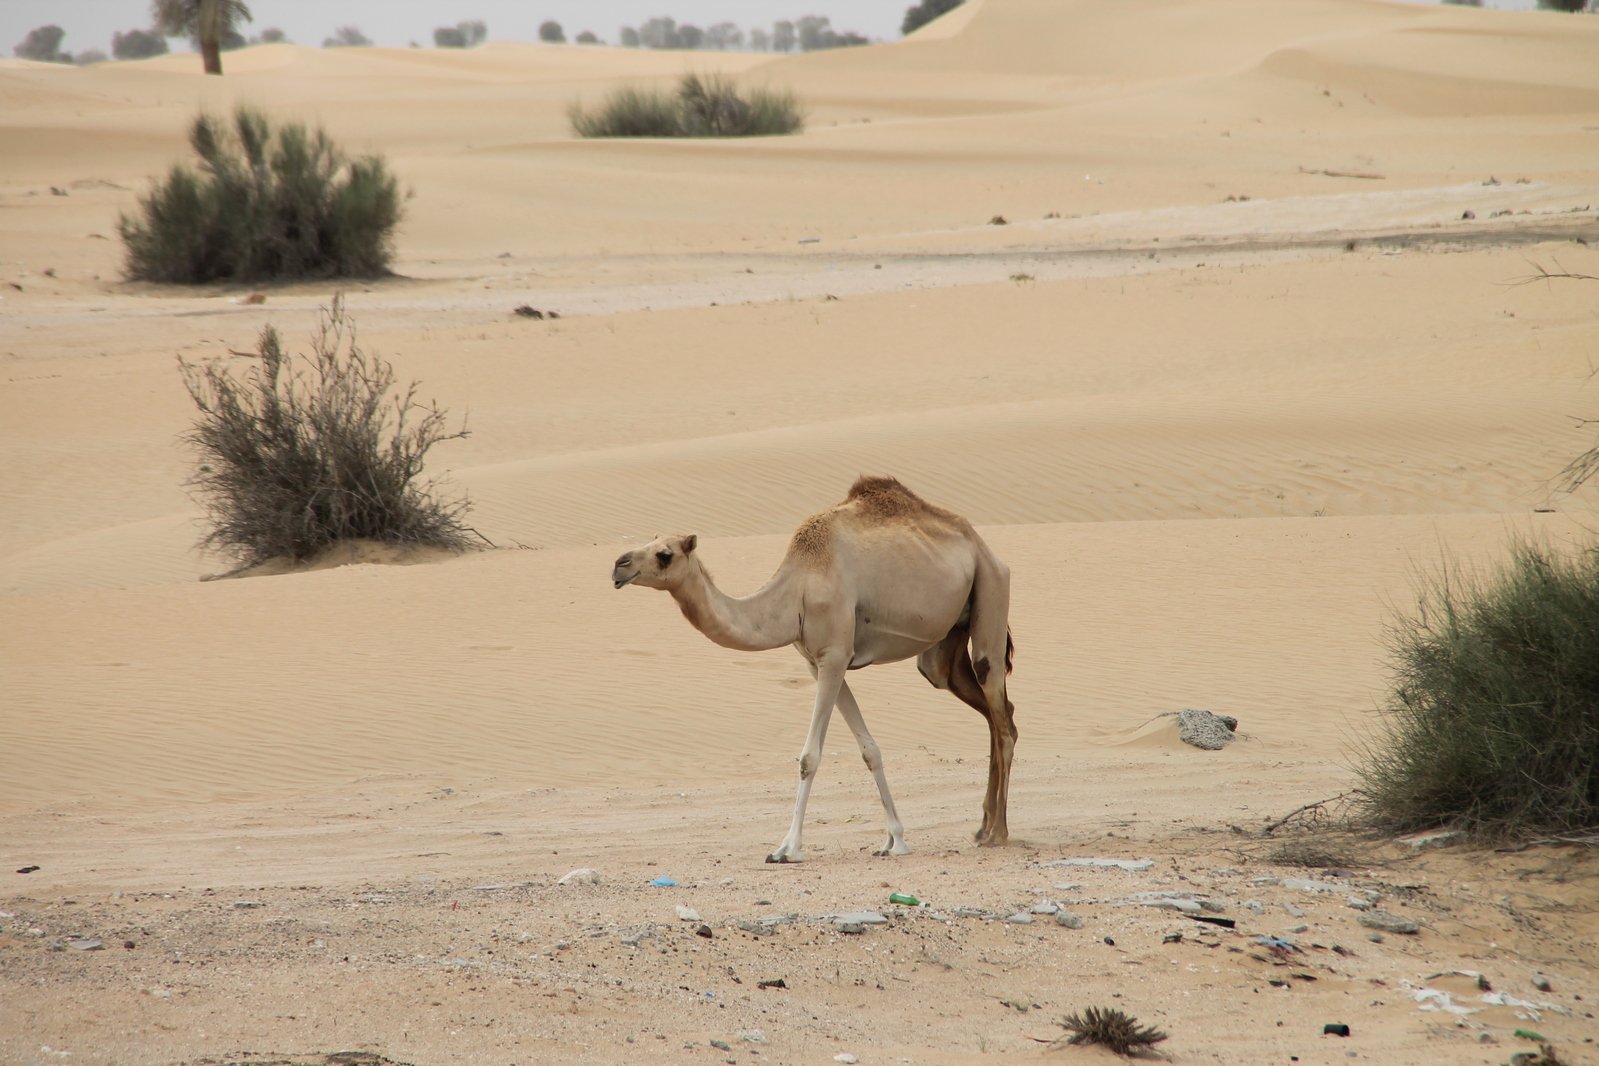 a camel with a saddle walks in the sand